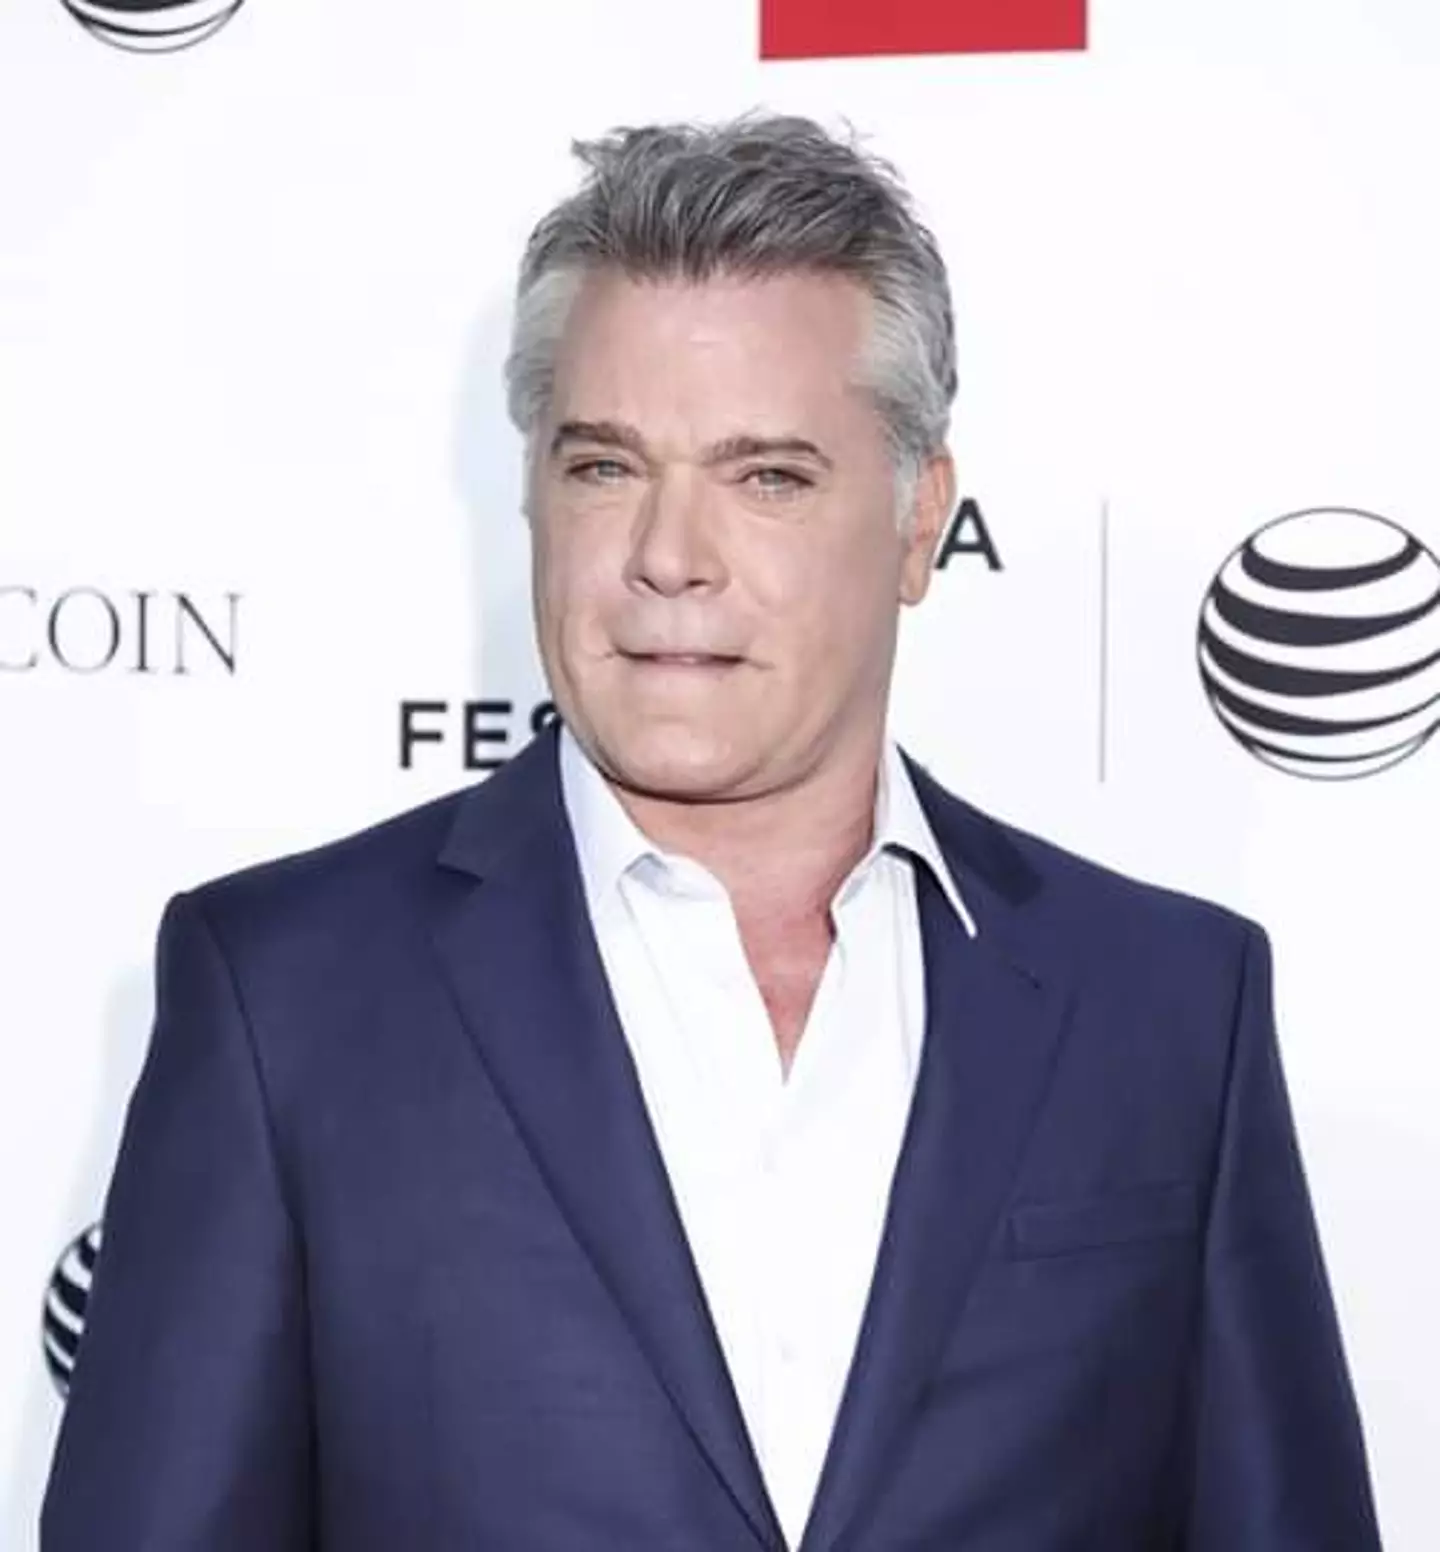 Ray Liotta turned down the chance to audition for Tim Burton's Batman